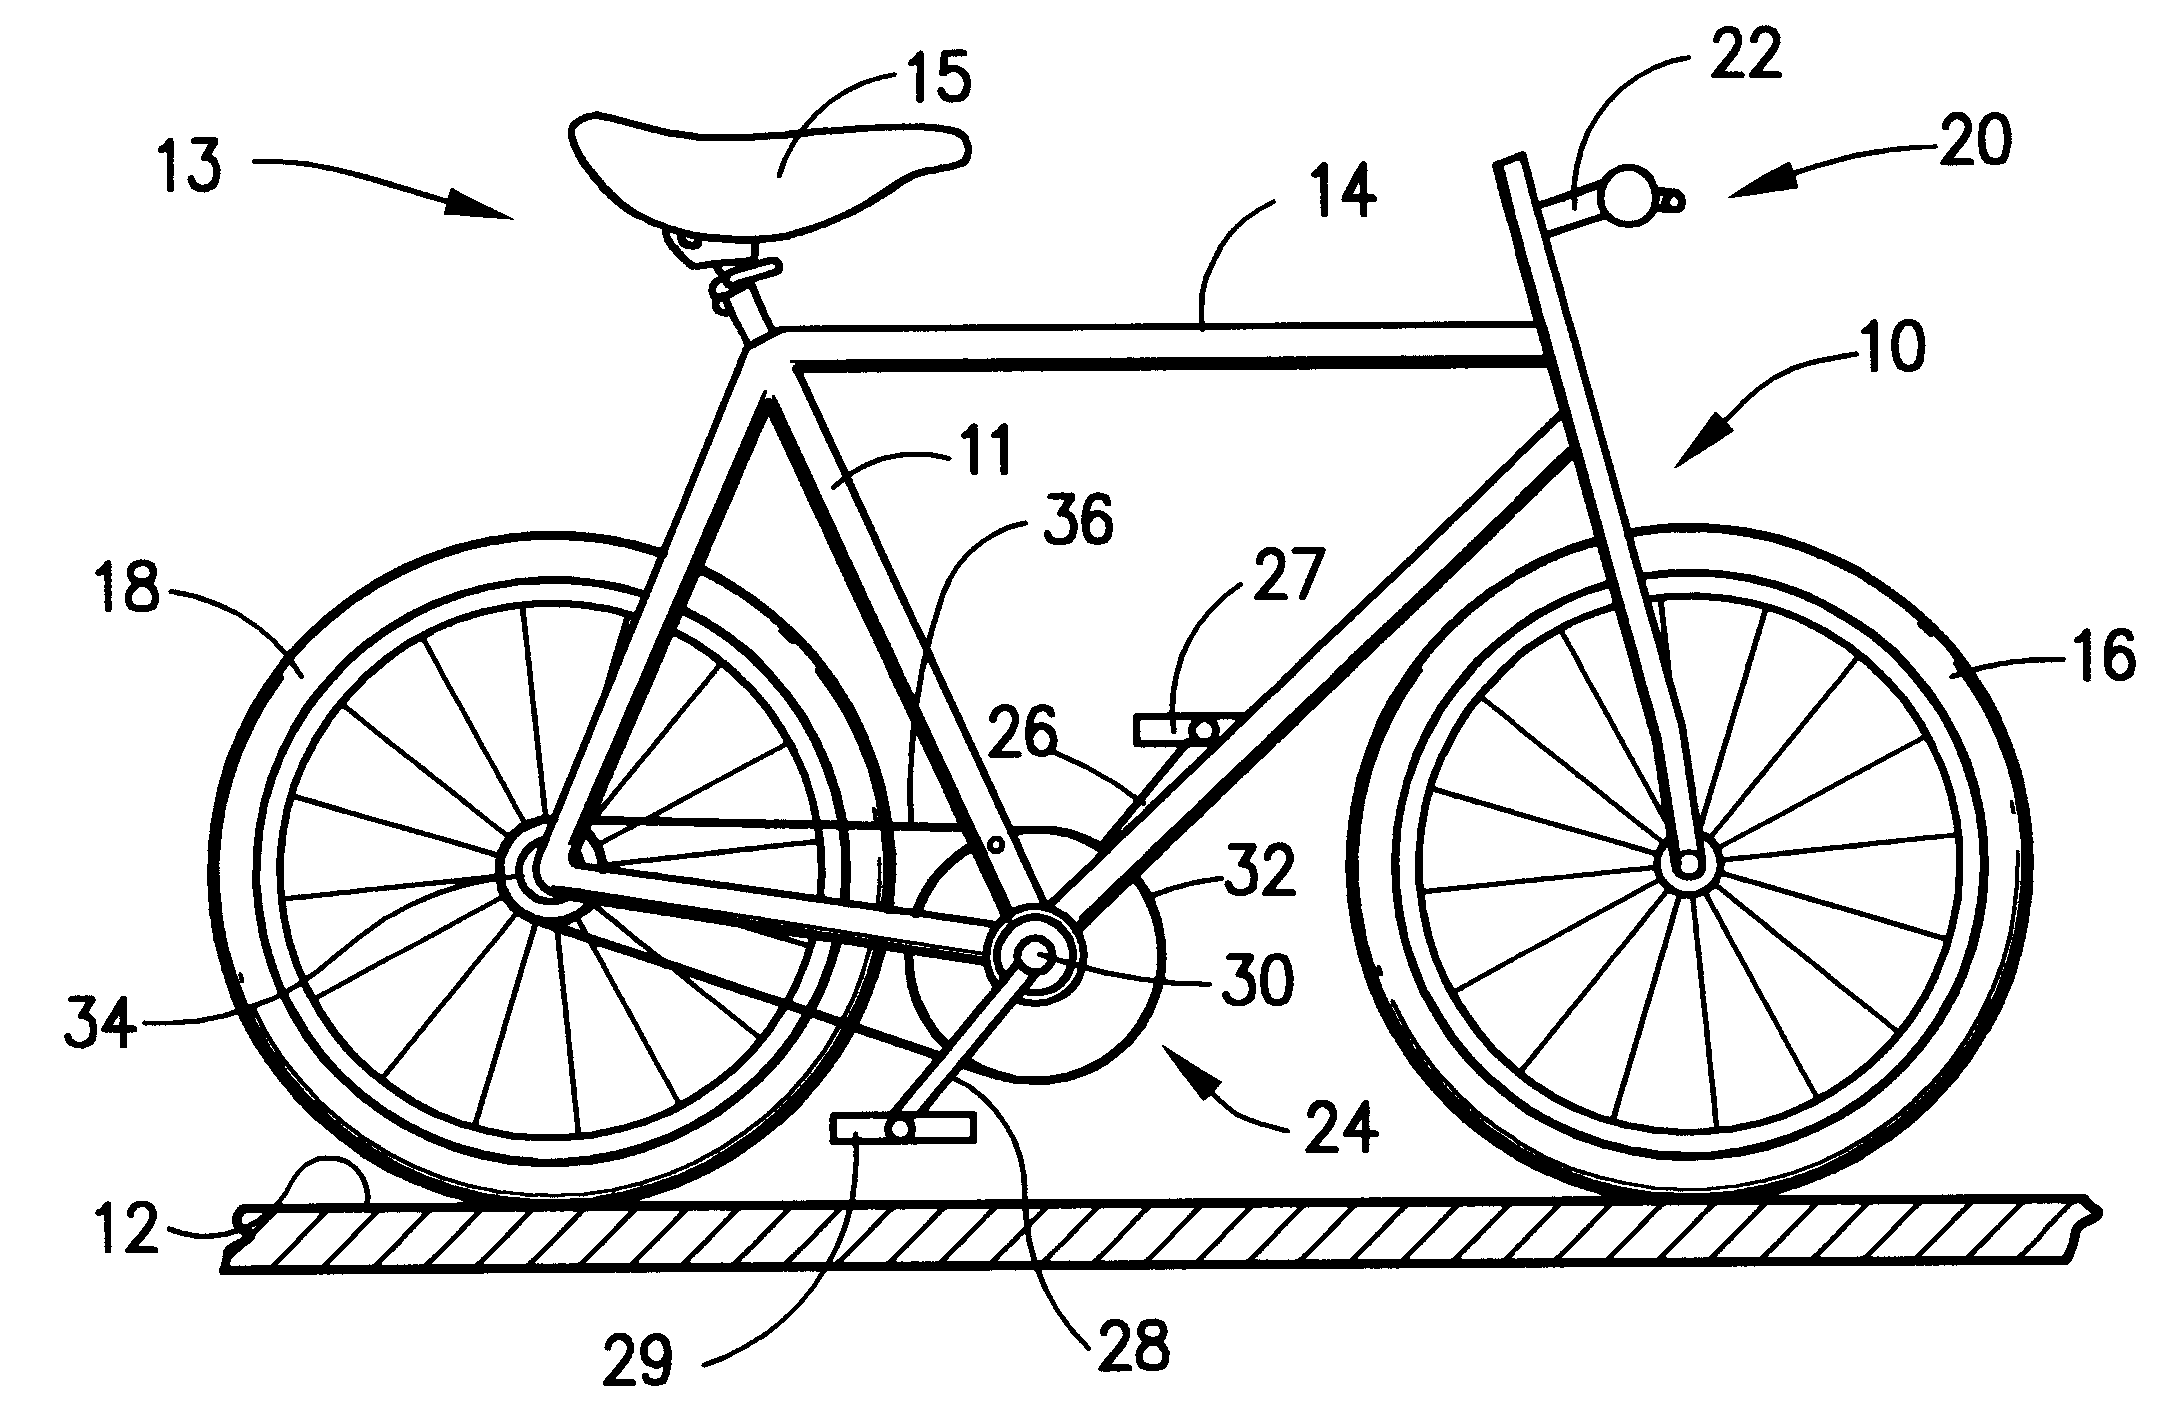 Cycle incorporating shock absorber